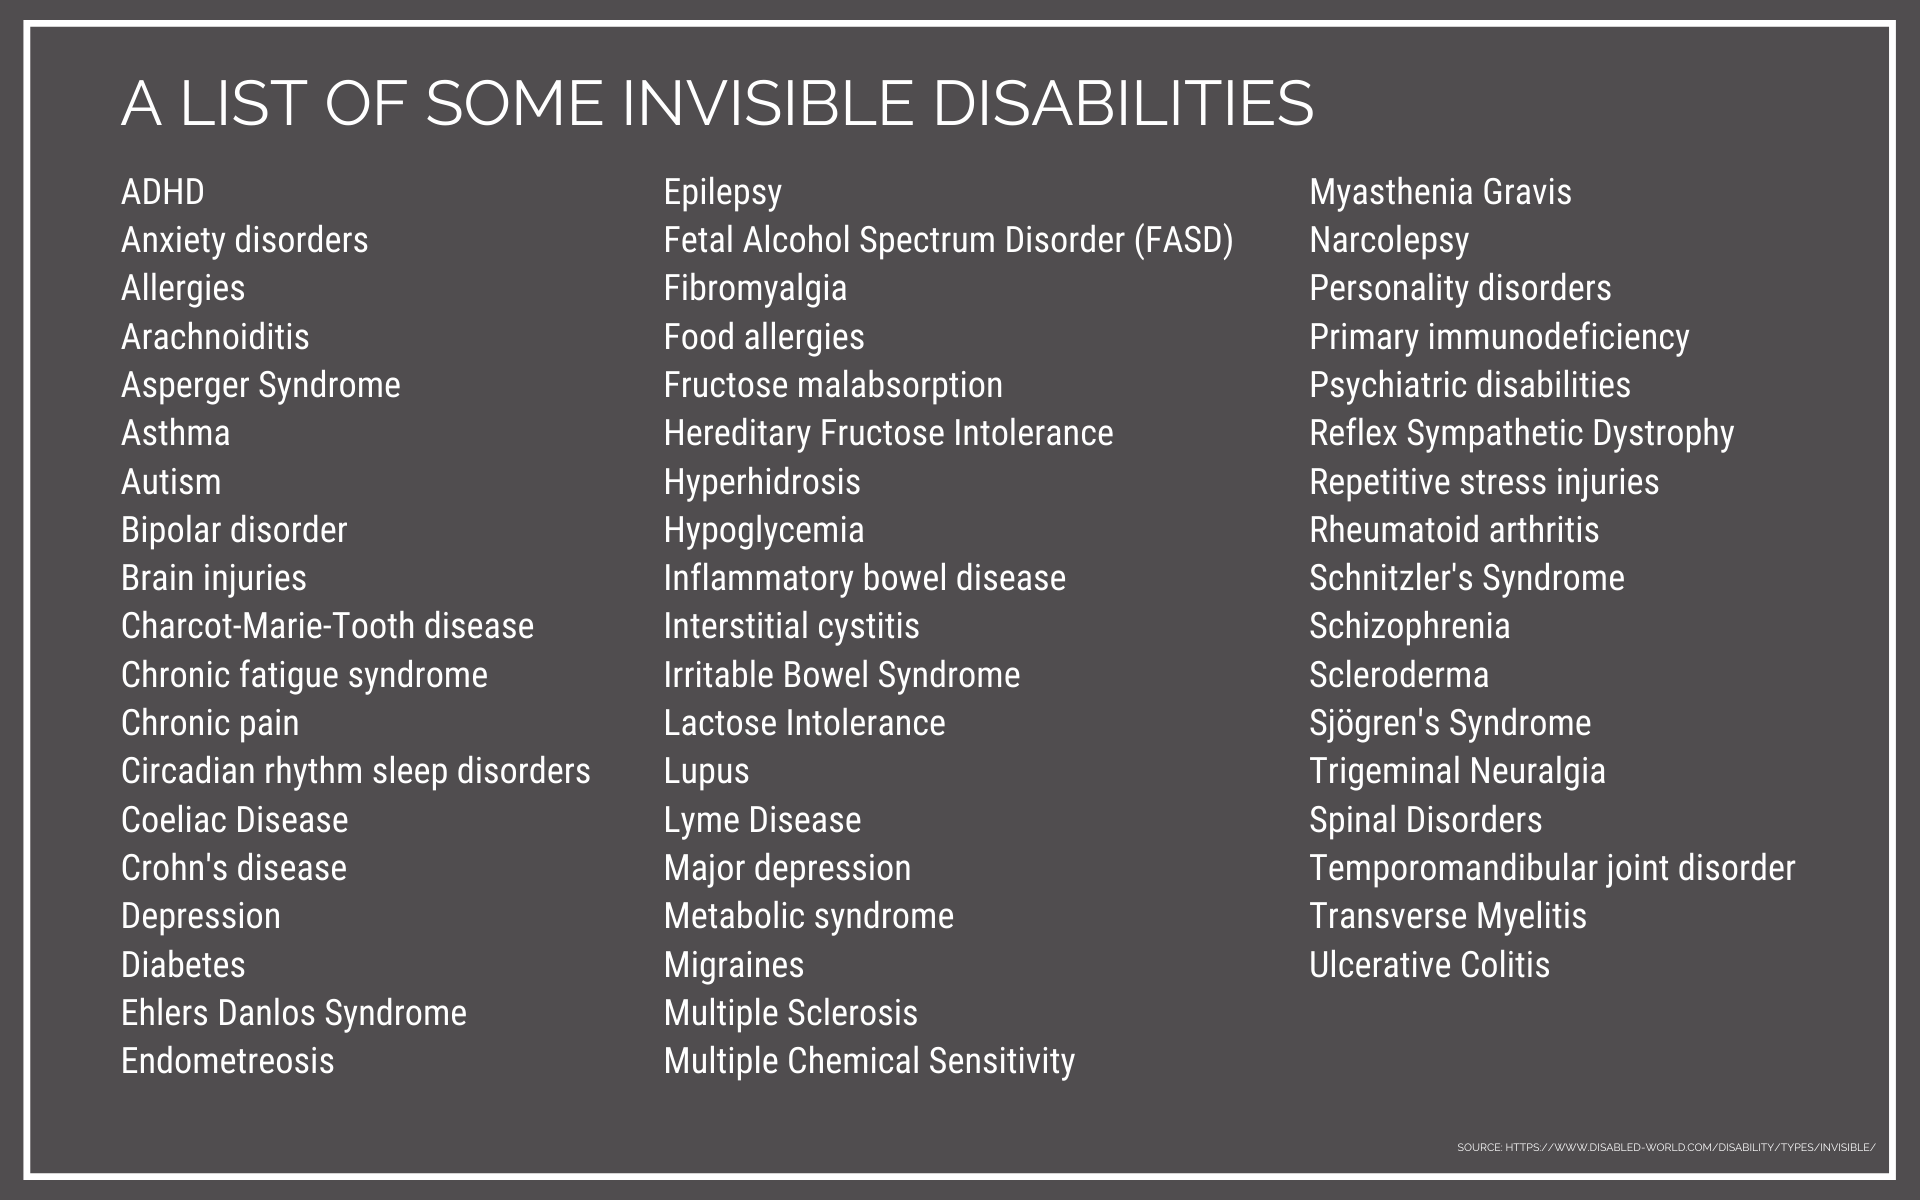 List of invisible disabilities